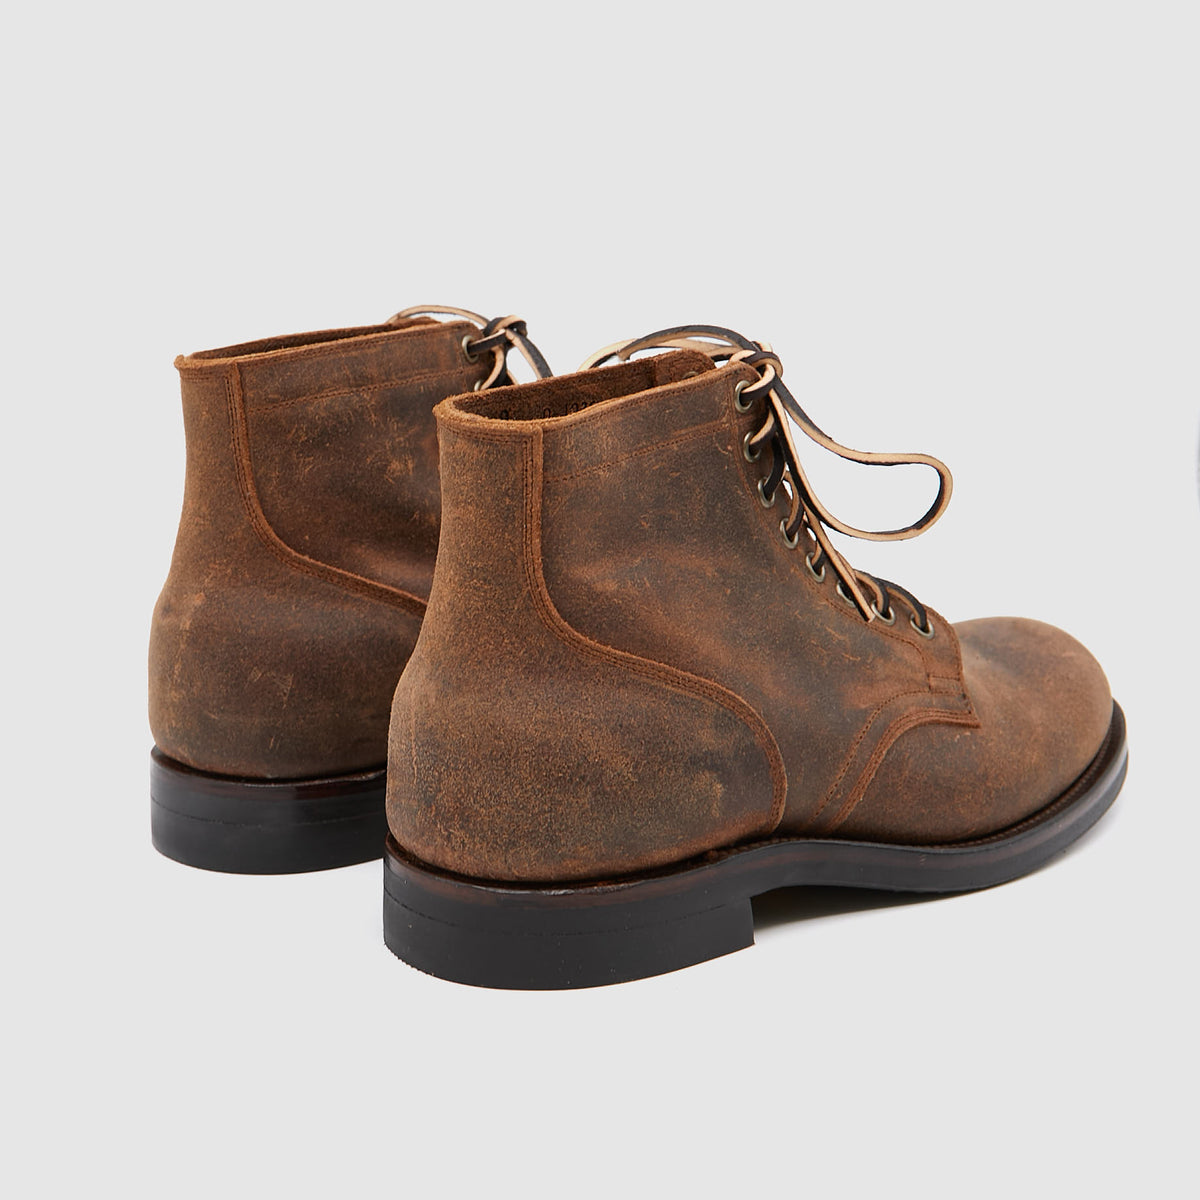 Viberg Service Boot Distressed Rawhide Leather